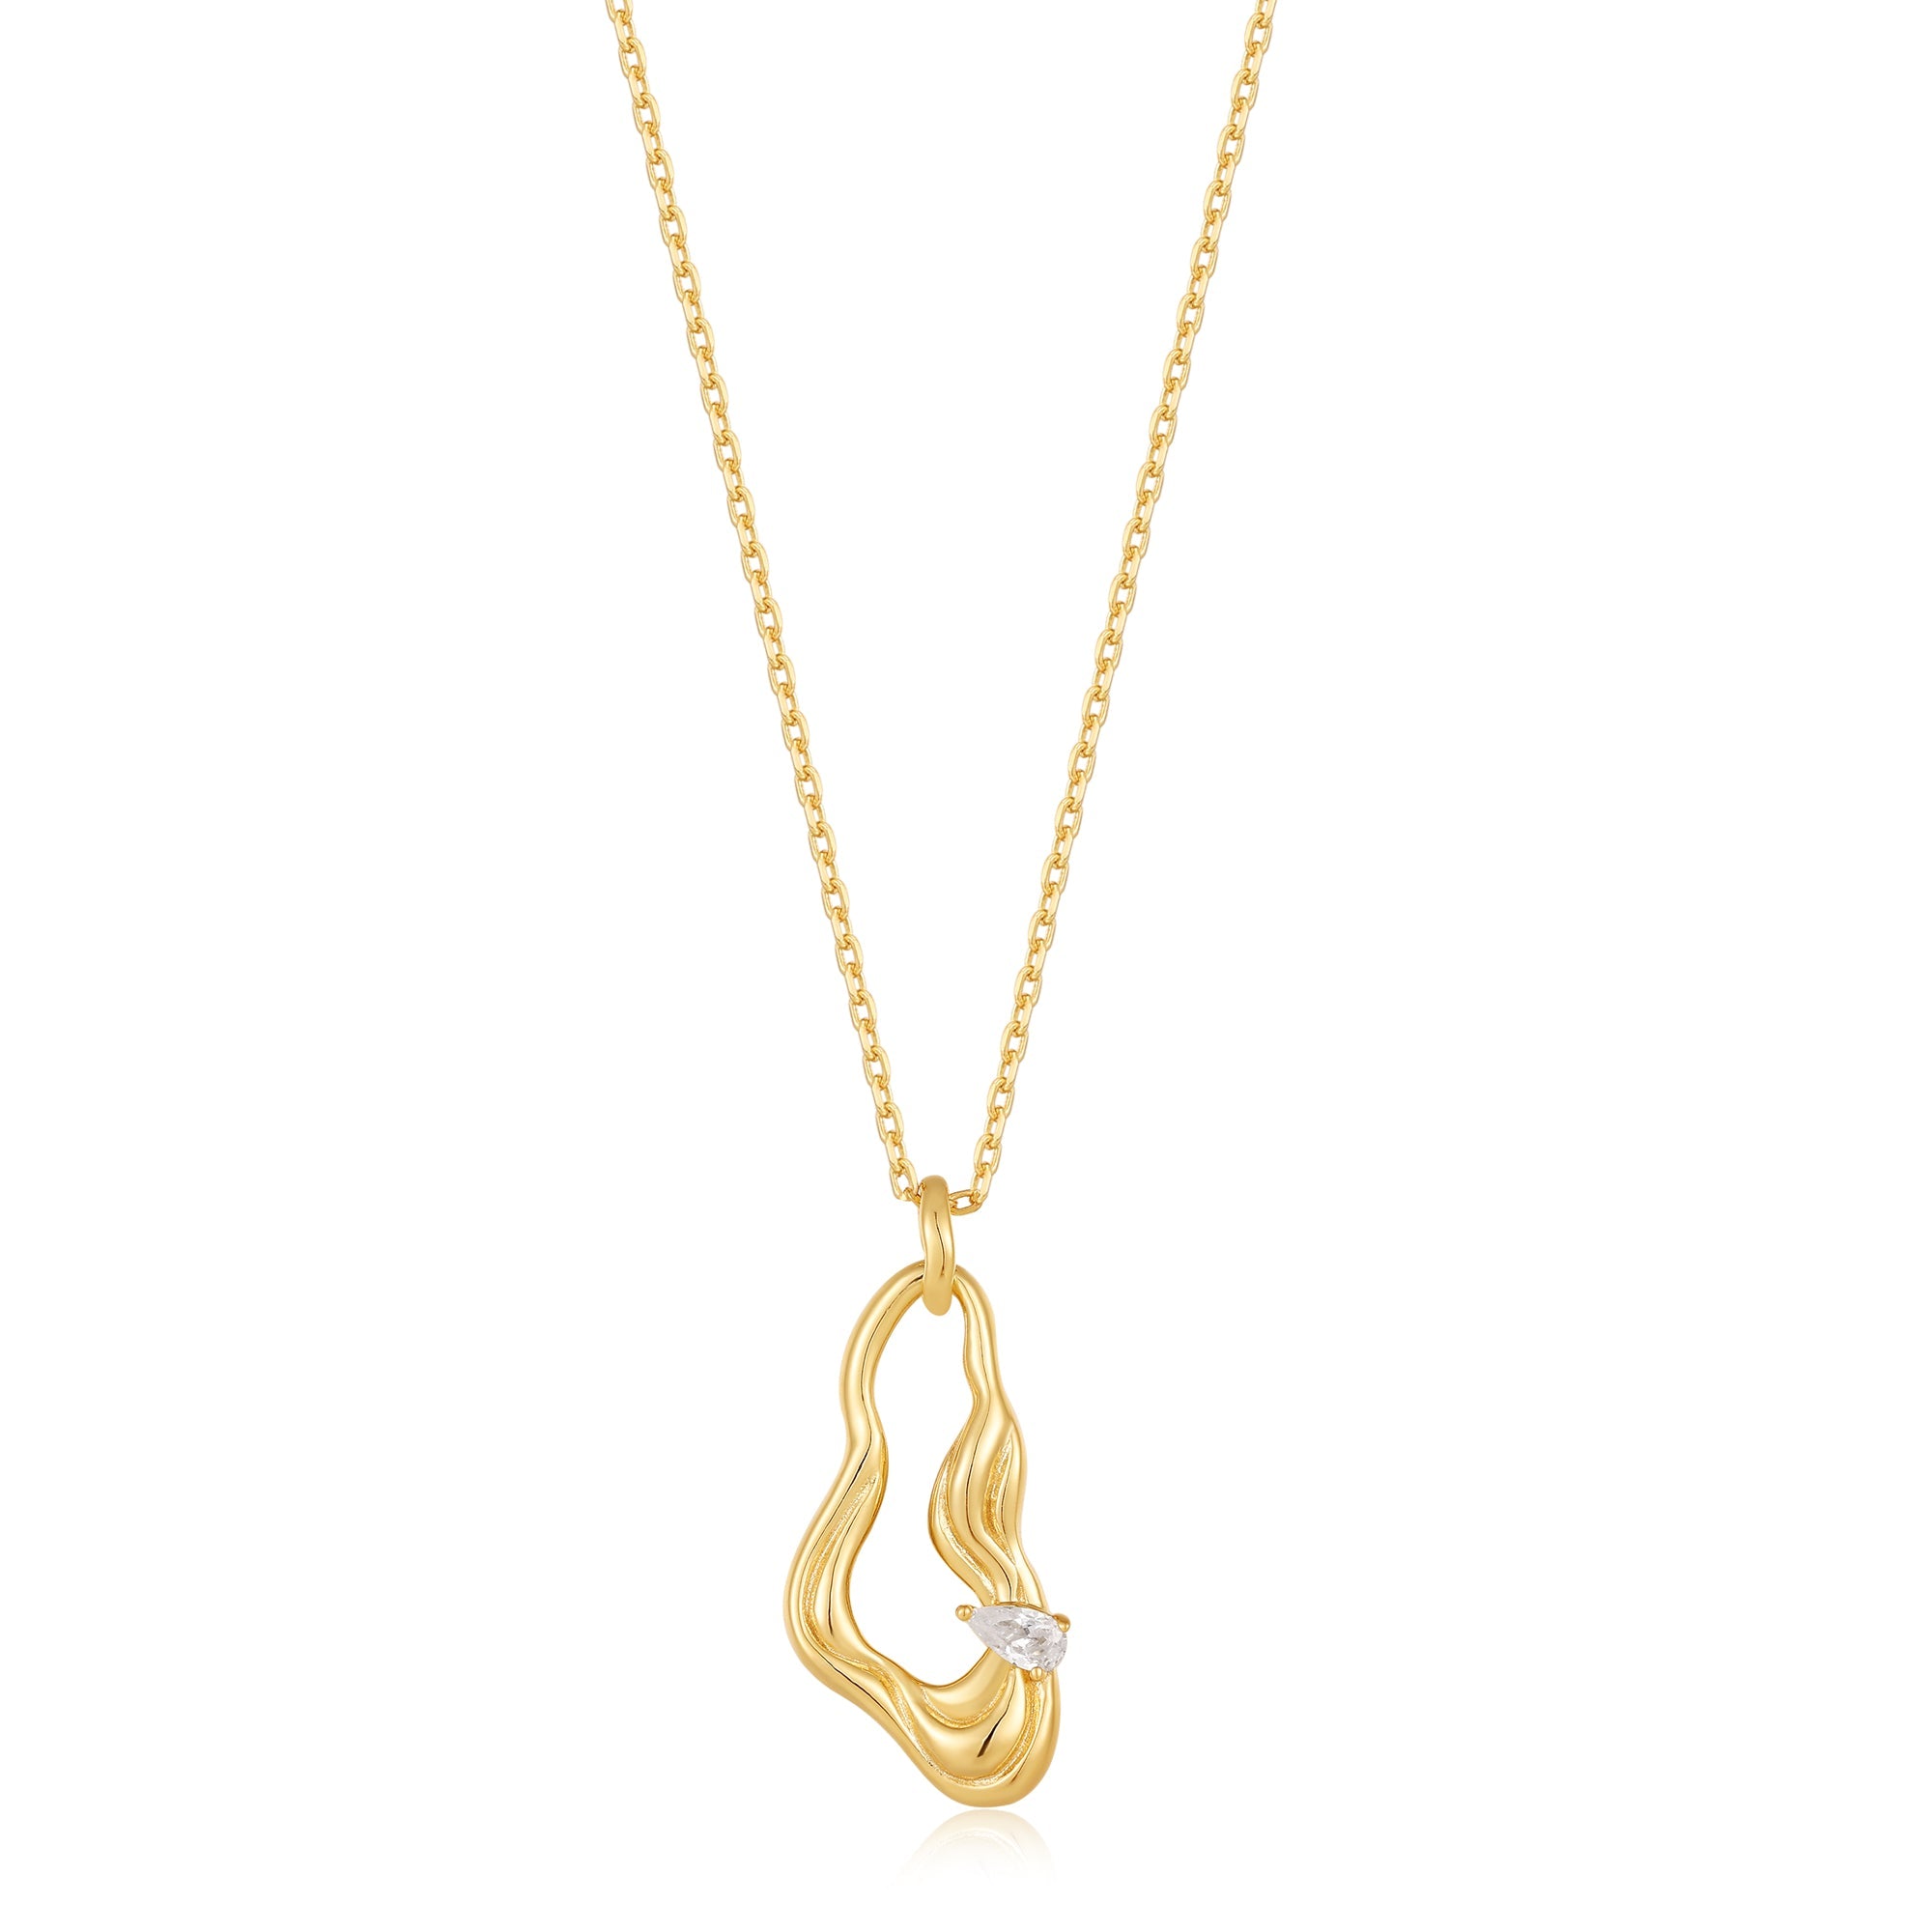 Ania Haie Sterling Silver Link Chain Charm Connector Necklace with Gold Overlay